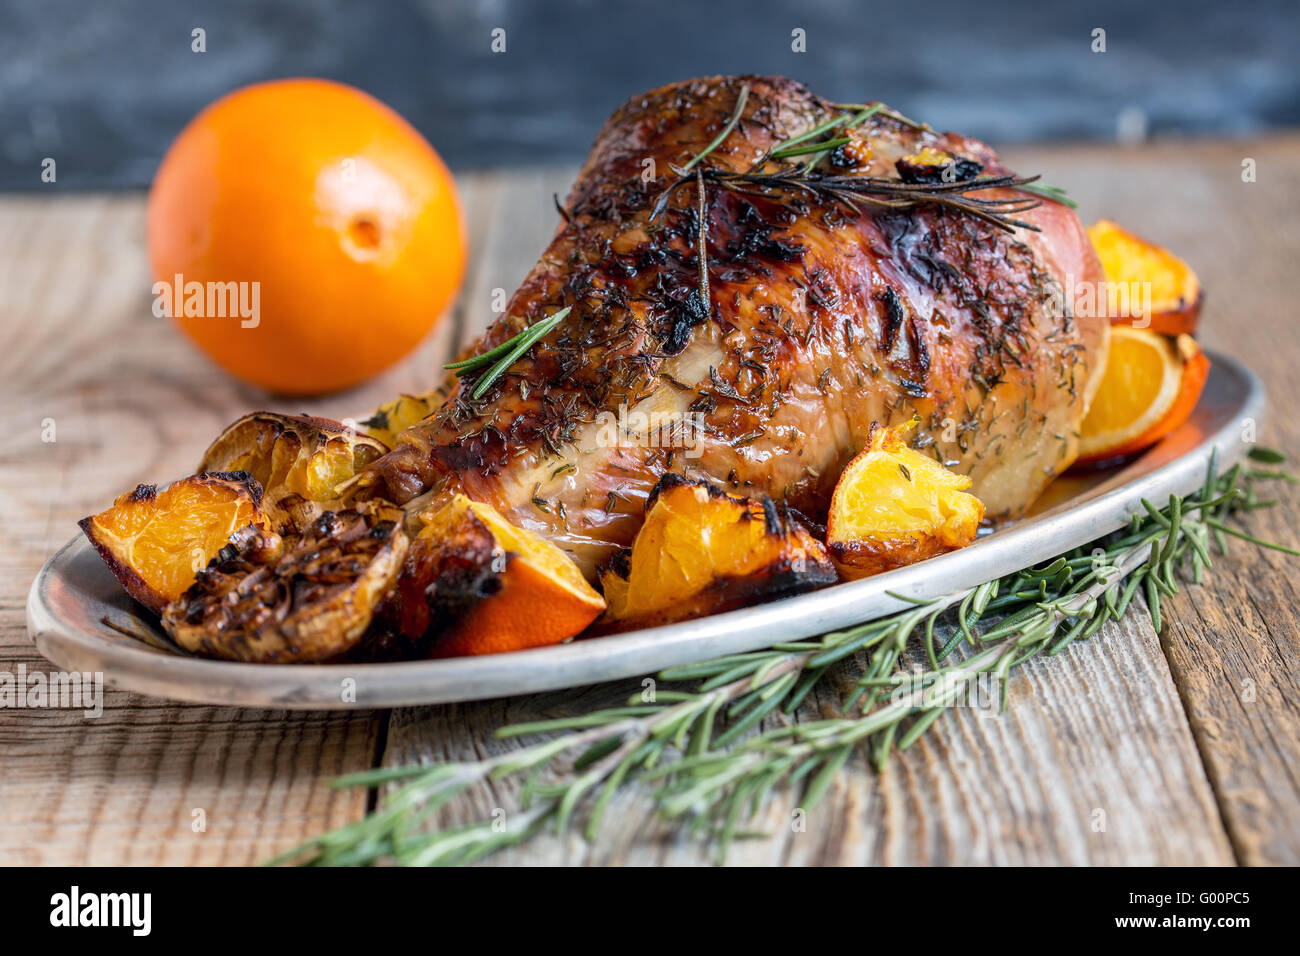 Thigh of turkey baked with oranges. Stock Photo